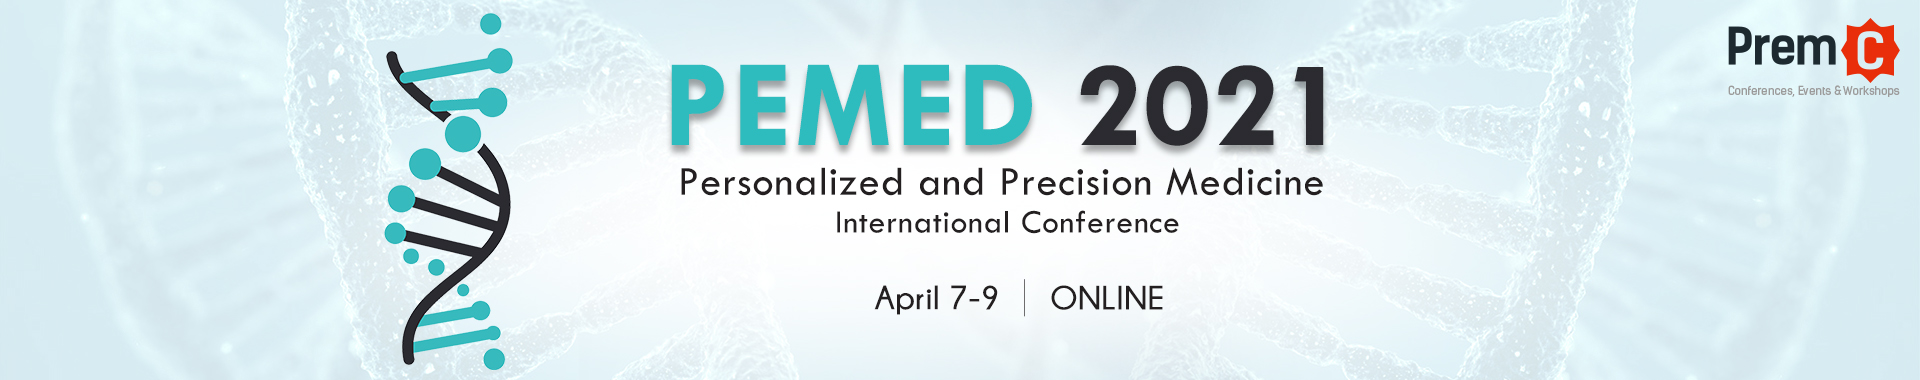 Personalized and Precision Medicine International Conference PEMED 2018